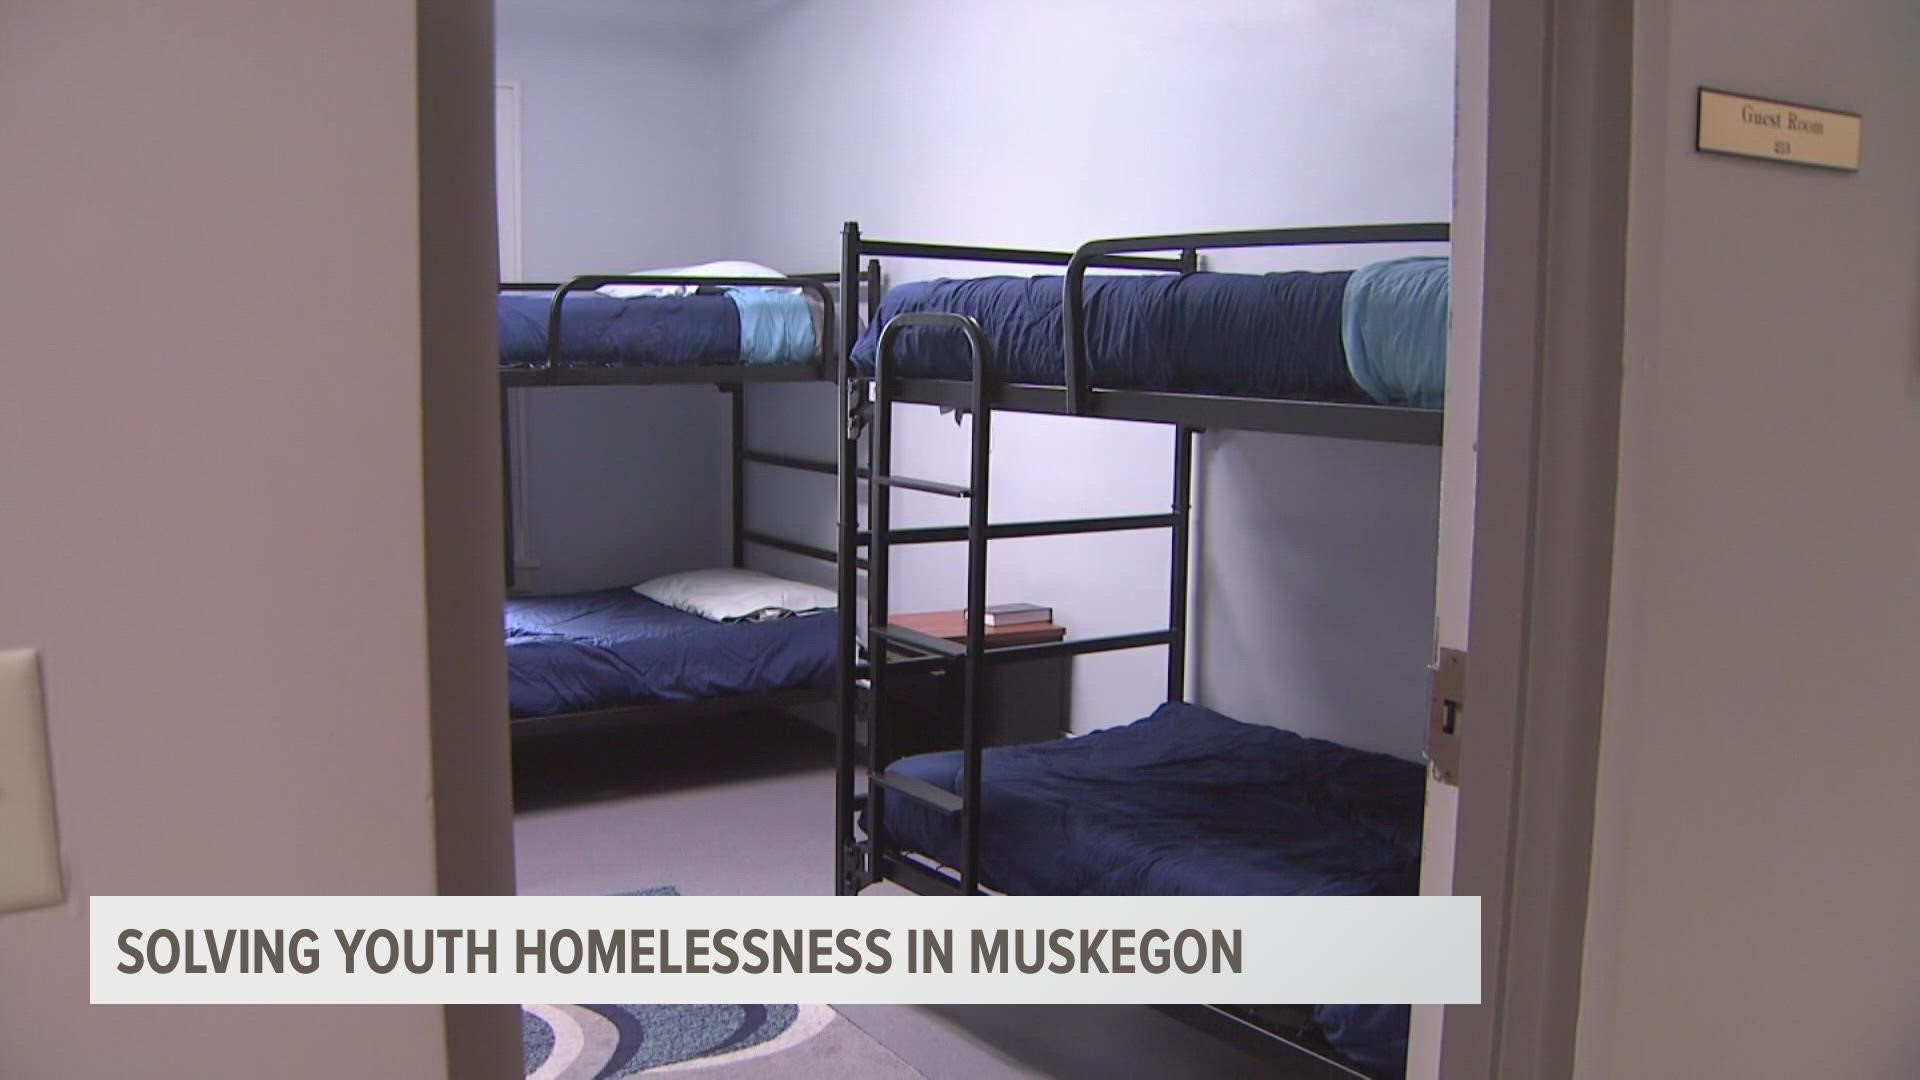 There were approximately 800 homeless children and teens living in Muskegon County, per data shared with 13 ON YOUR SIDE.